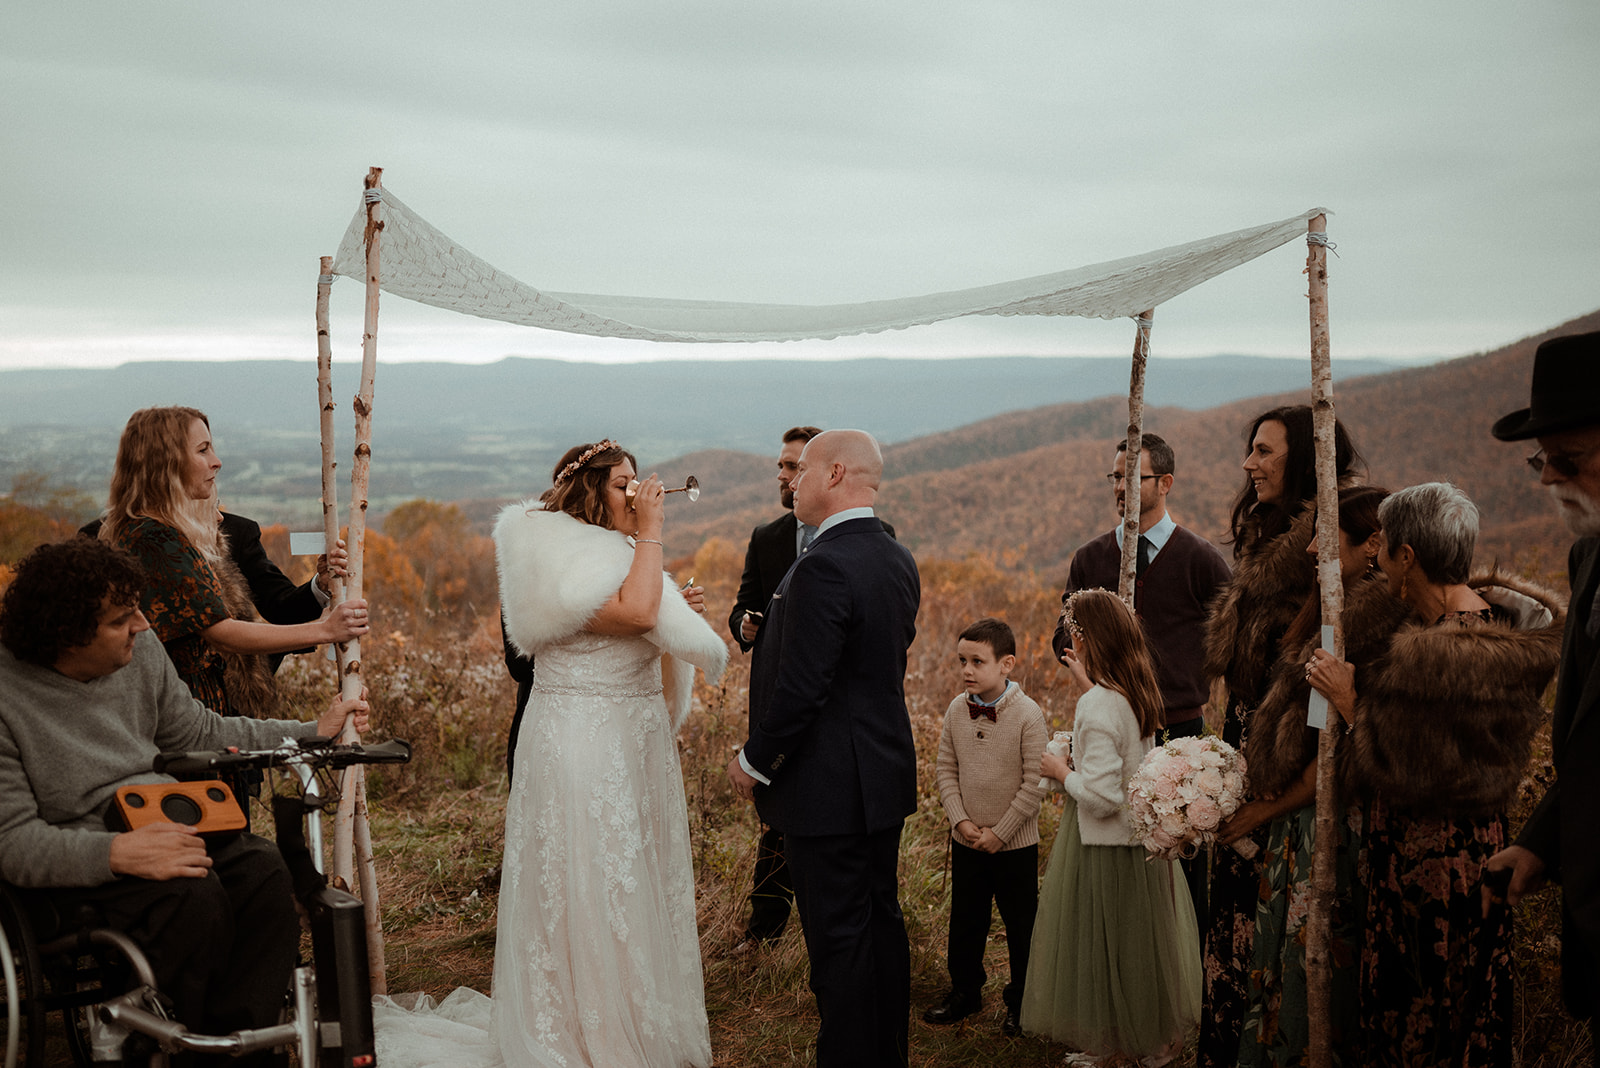 Ideas for a Jewish elopement in the mountains - Elopement with family in Shenandoah National Park, Blue Ridge Mountains